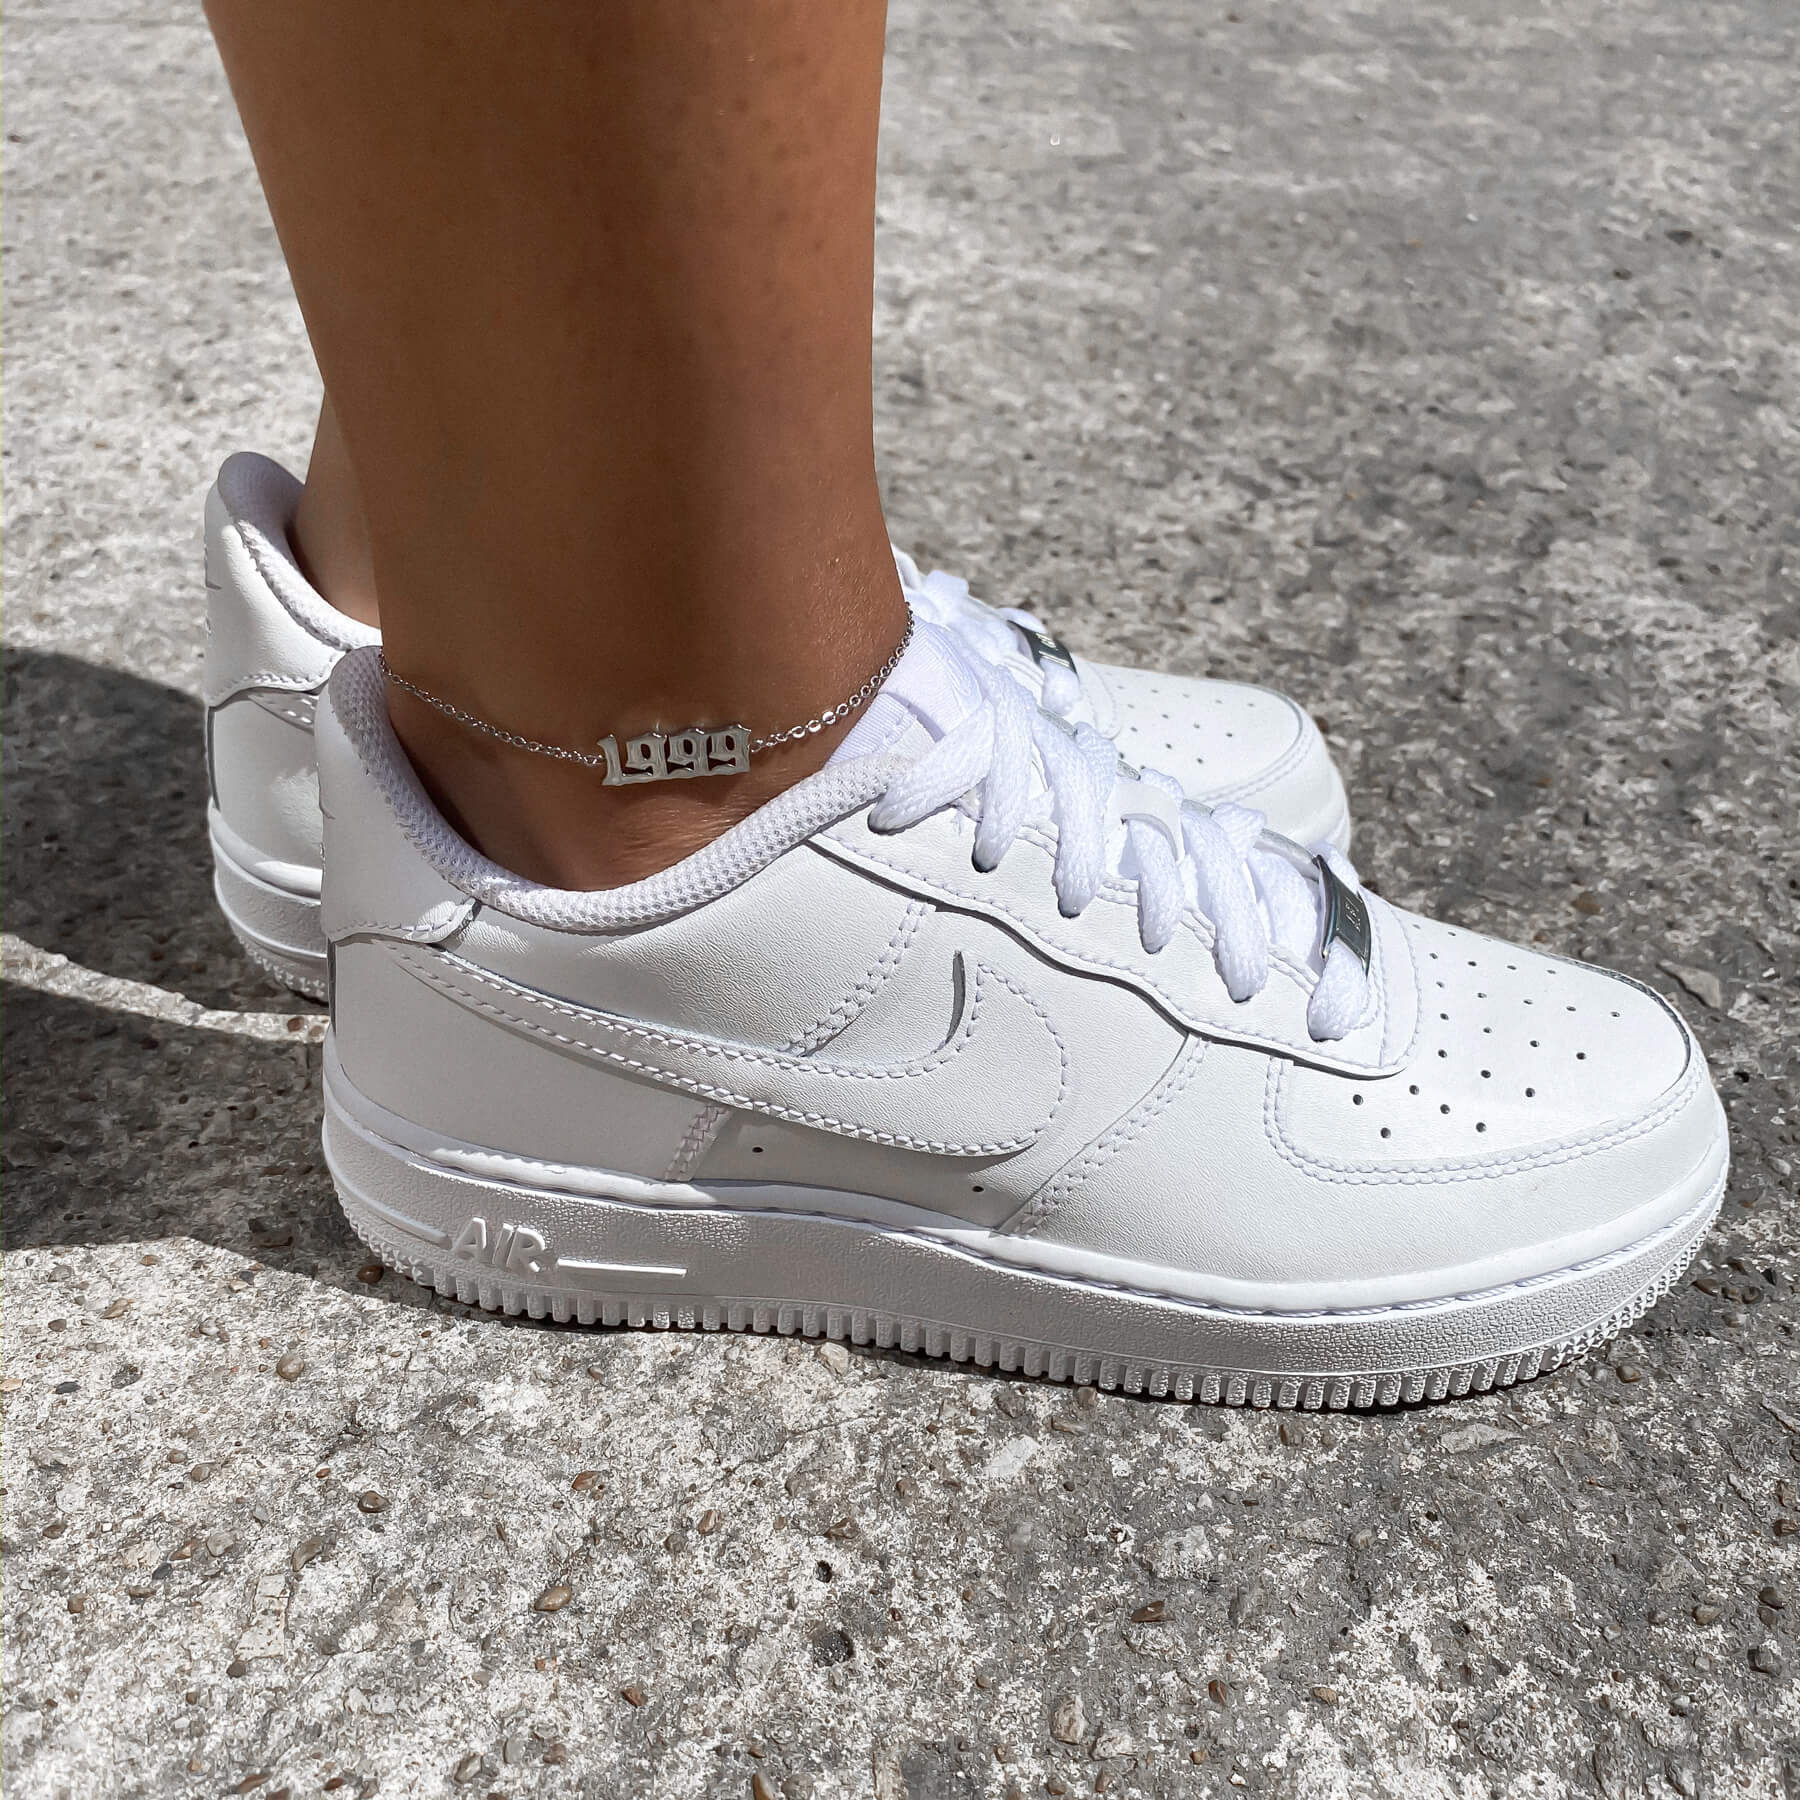 A woman wearing a 1999 silver birth year anklet and white sneakers